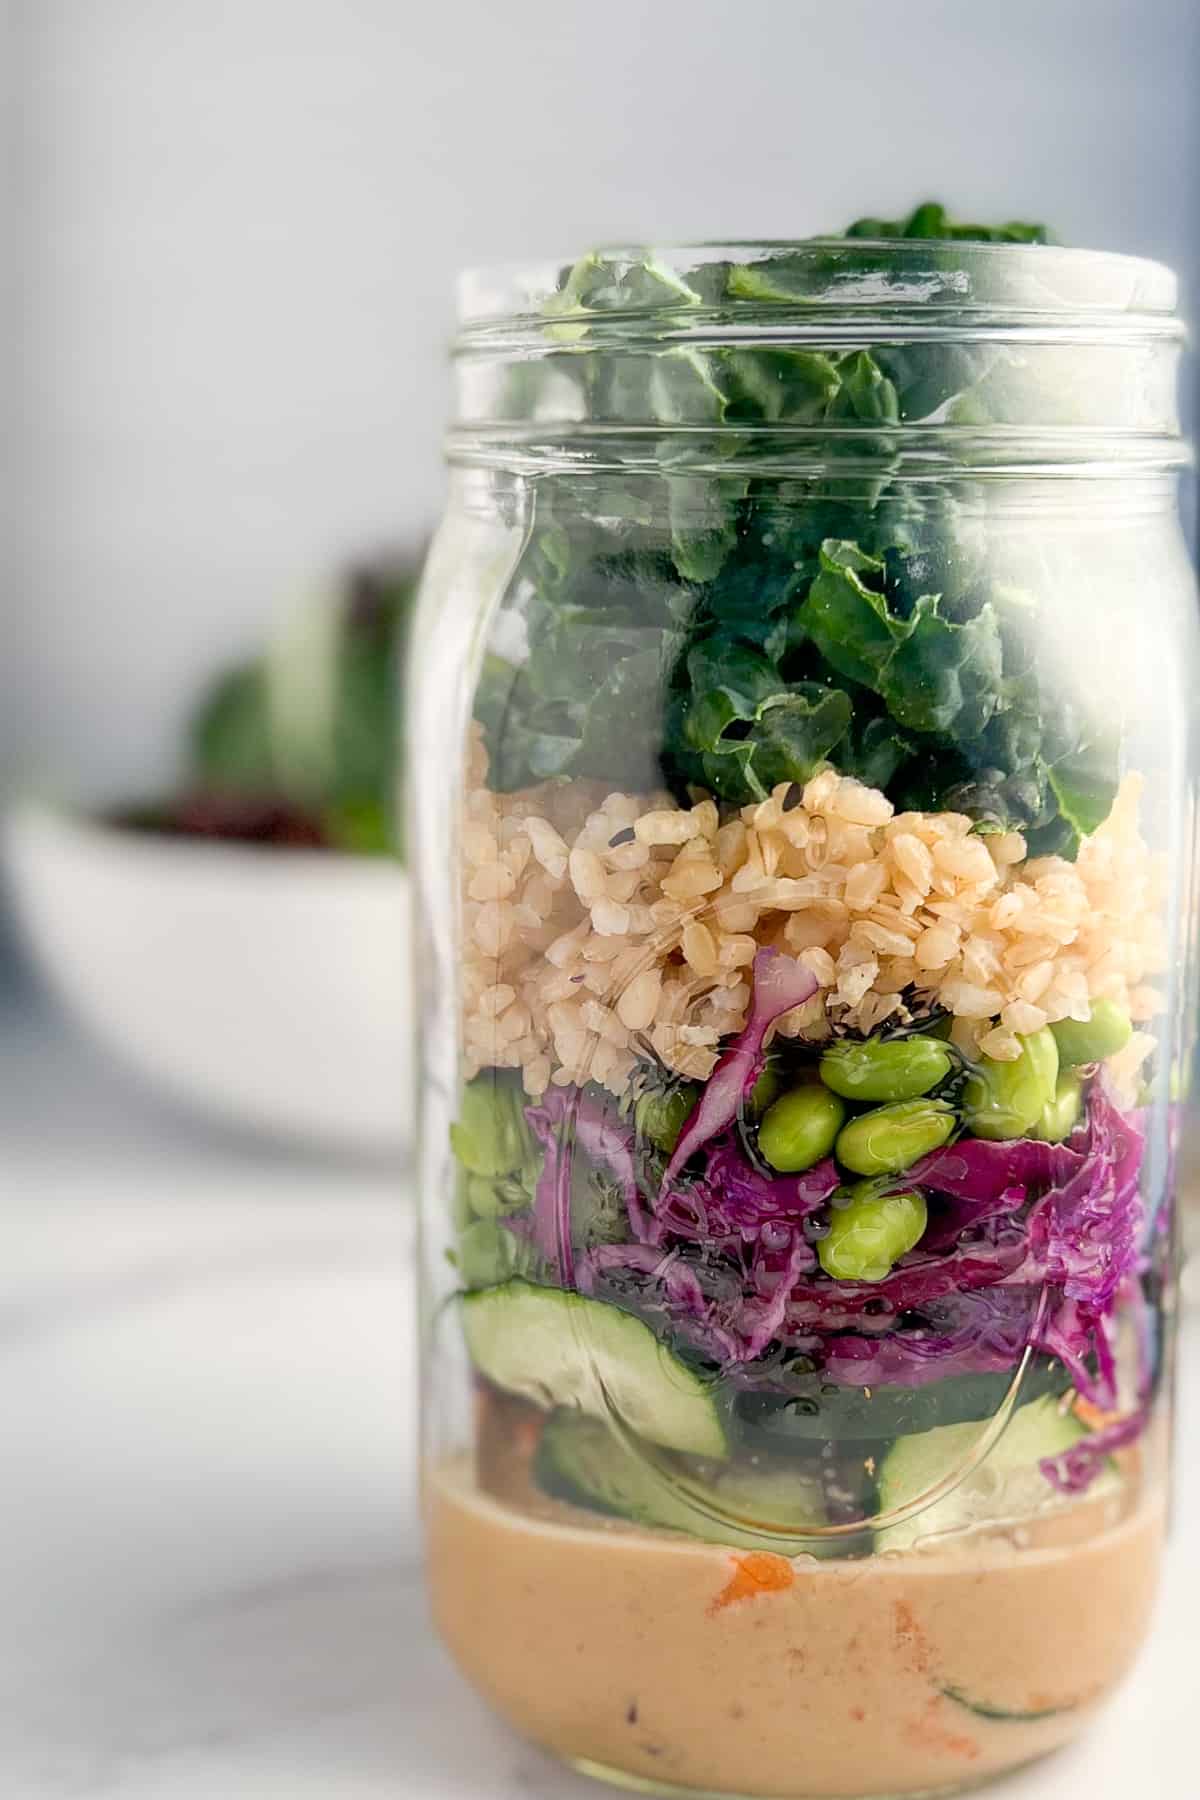 side view close up of Asian salad in a jar with a bowl of mixed salad greens blurred in the background.